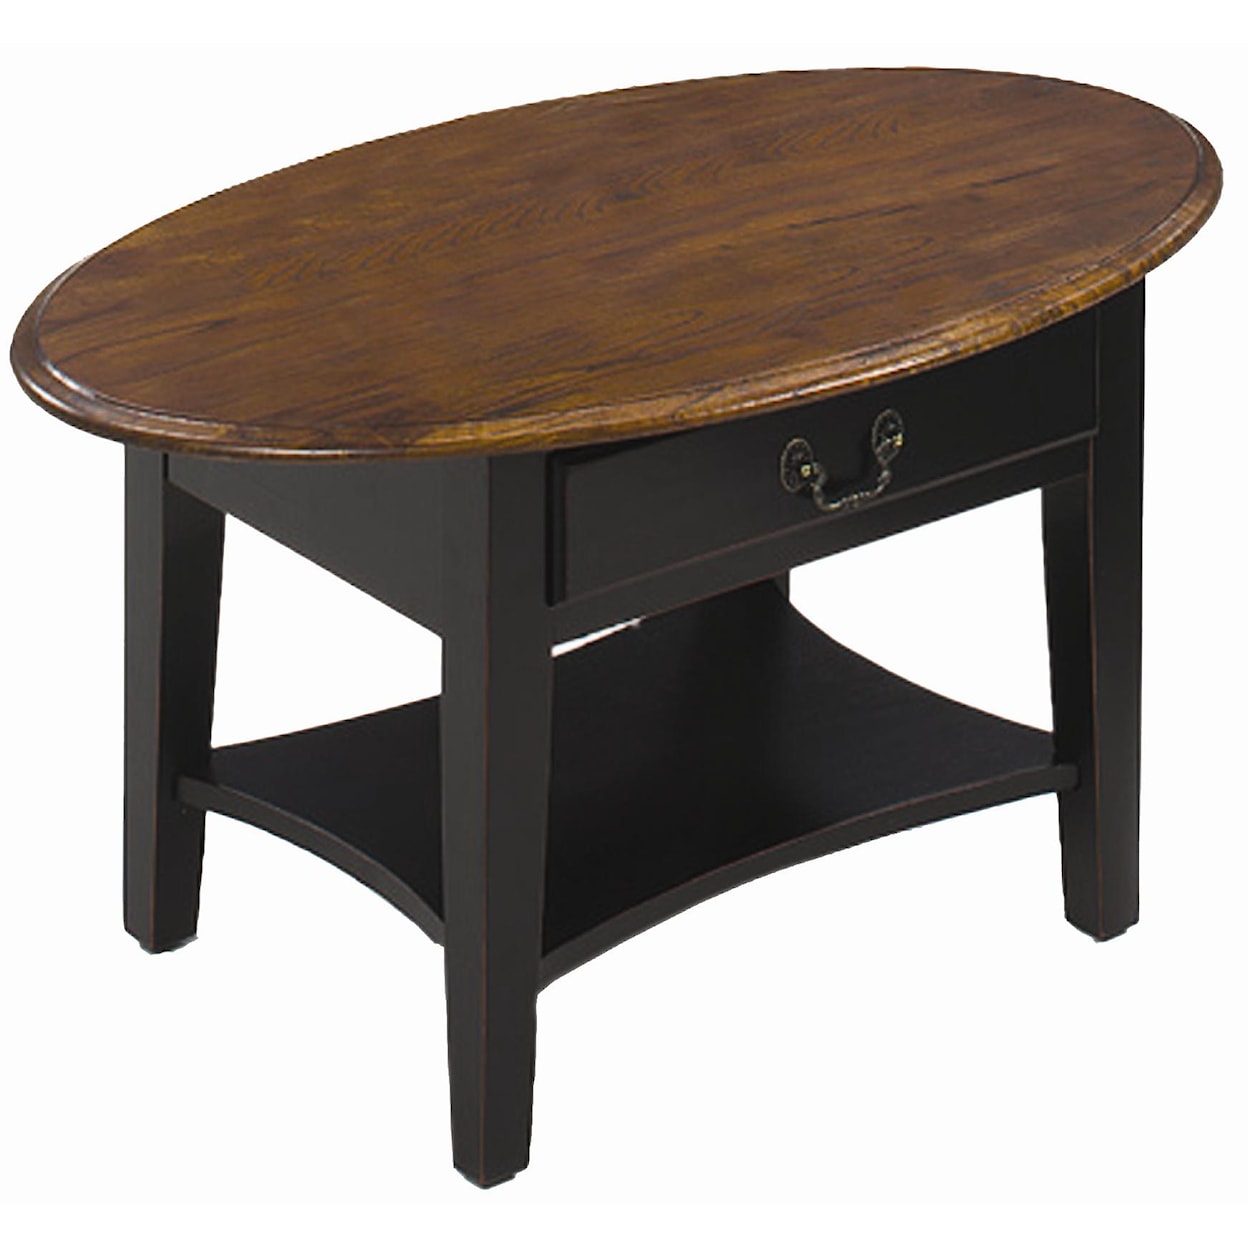 Leick Furniture Favorite Finds Oval Coffee Table